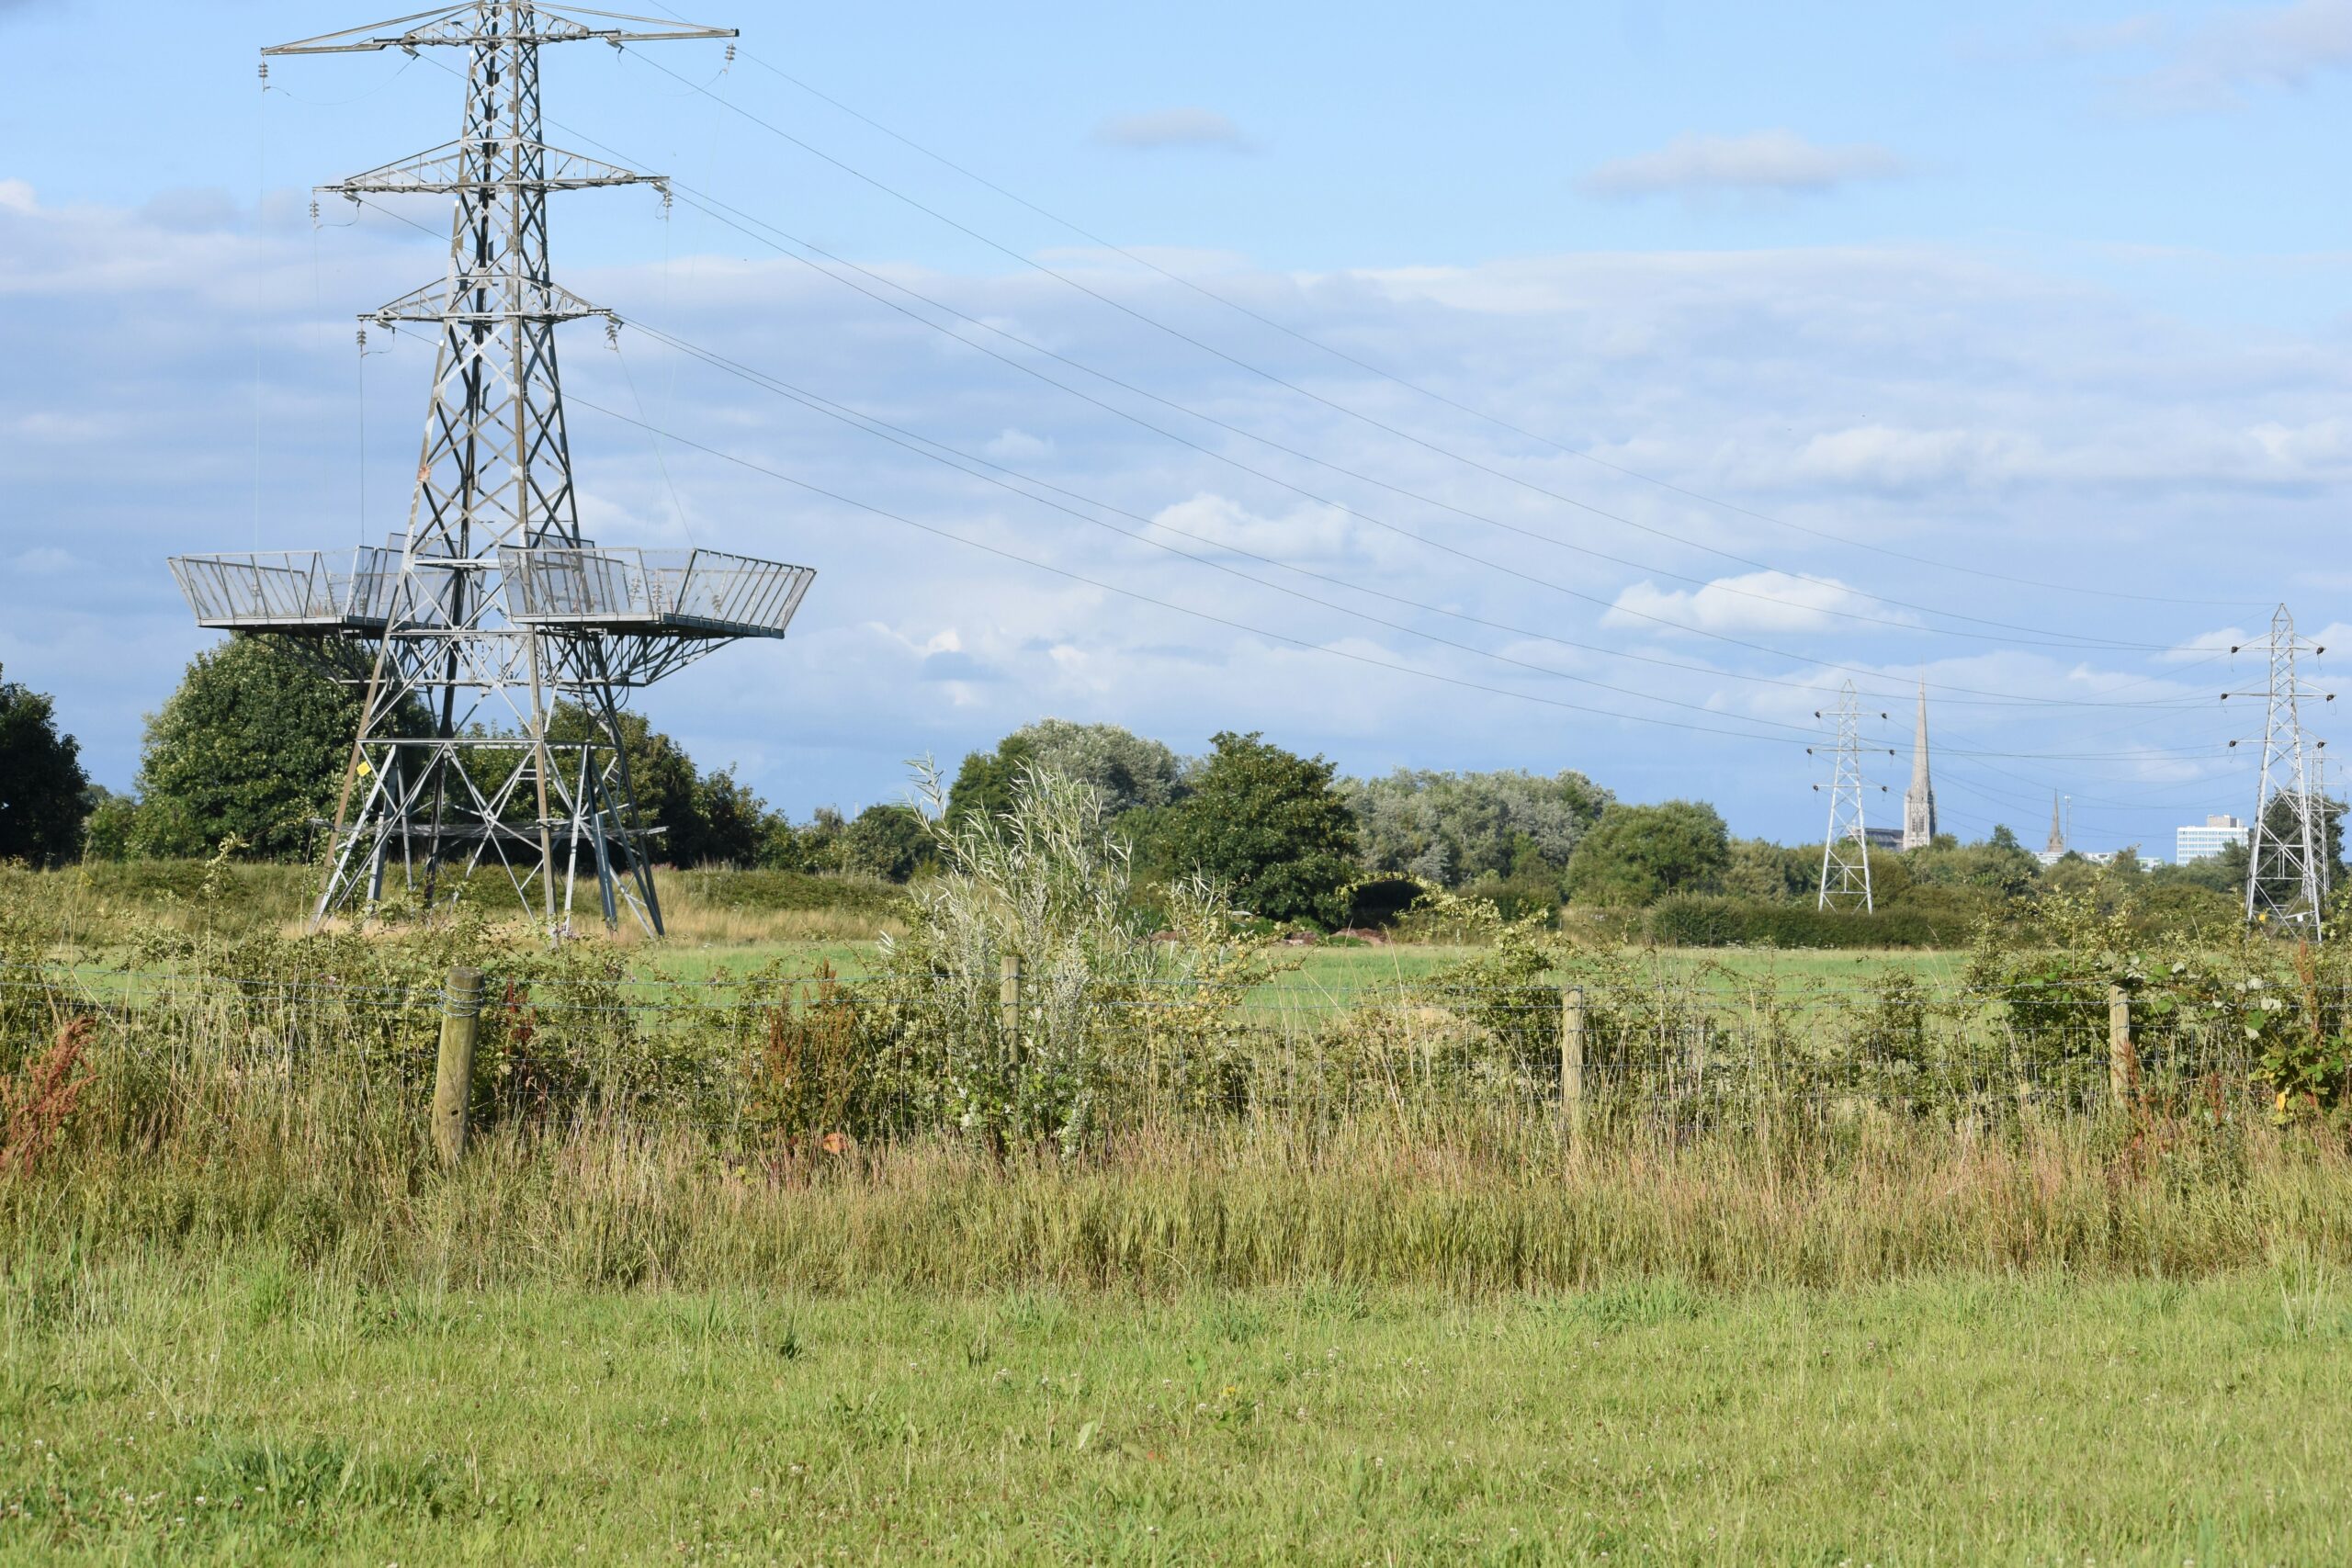 Pylons in the countryside with a church spire in the distance